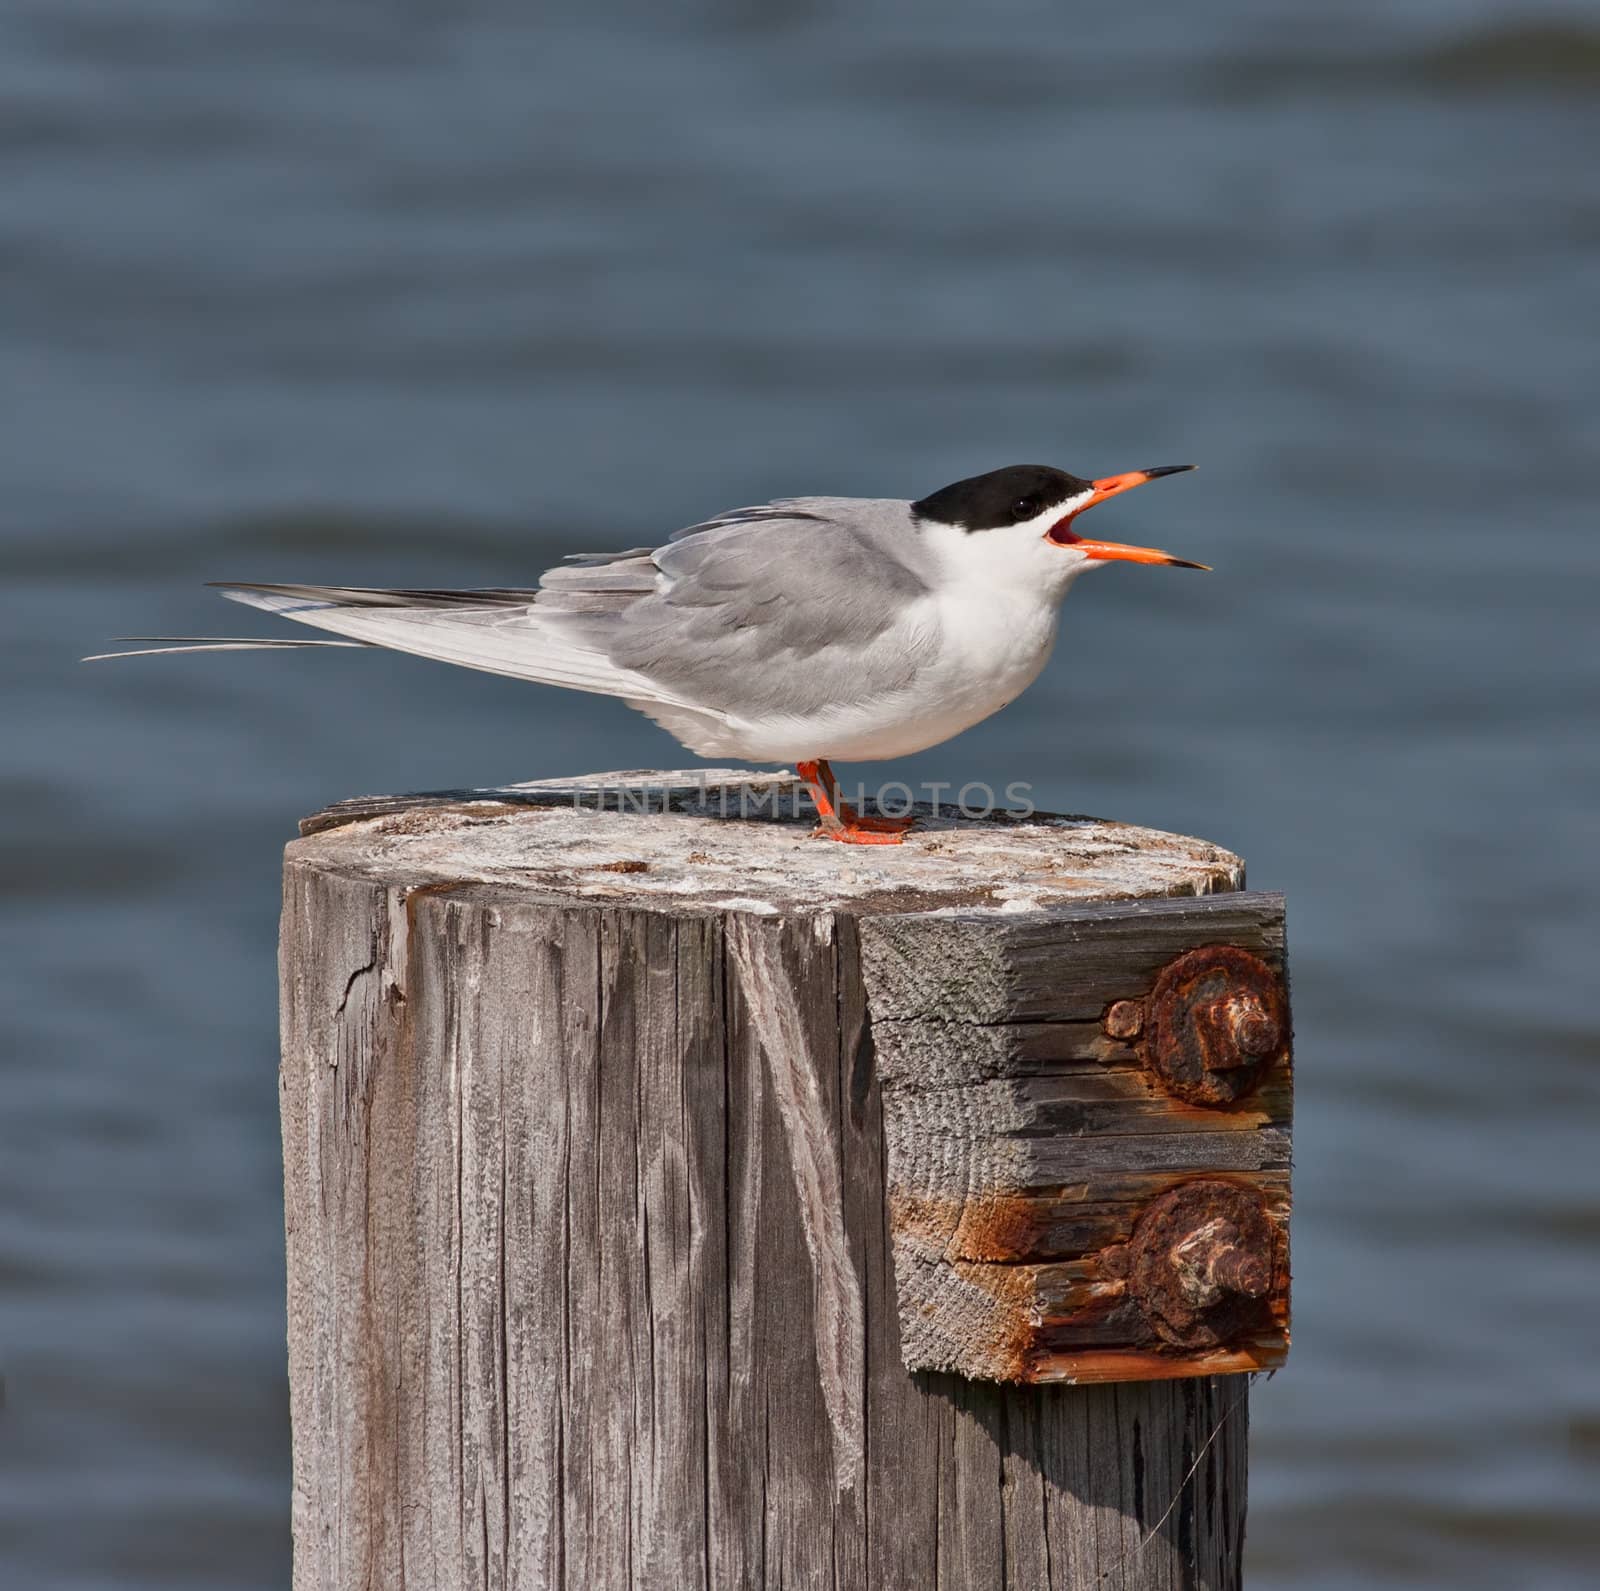 A Forster's Tern bird sitting on a wood perch with an OOF water background.